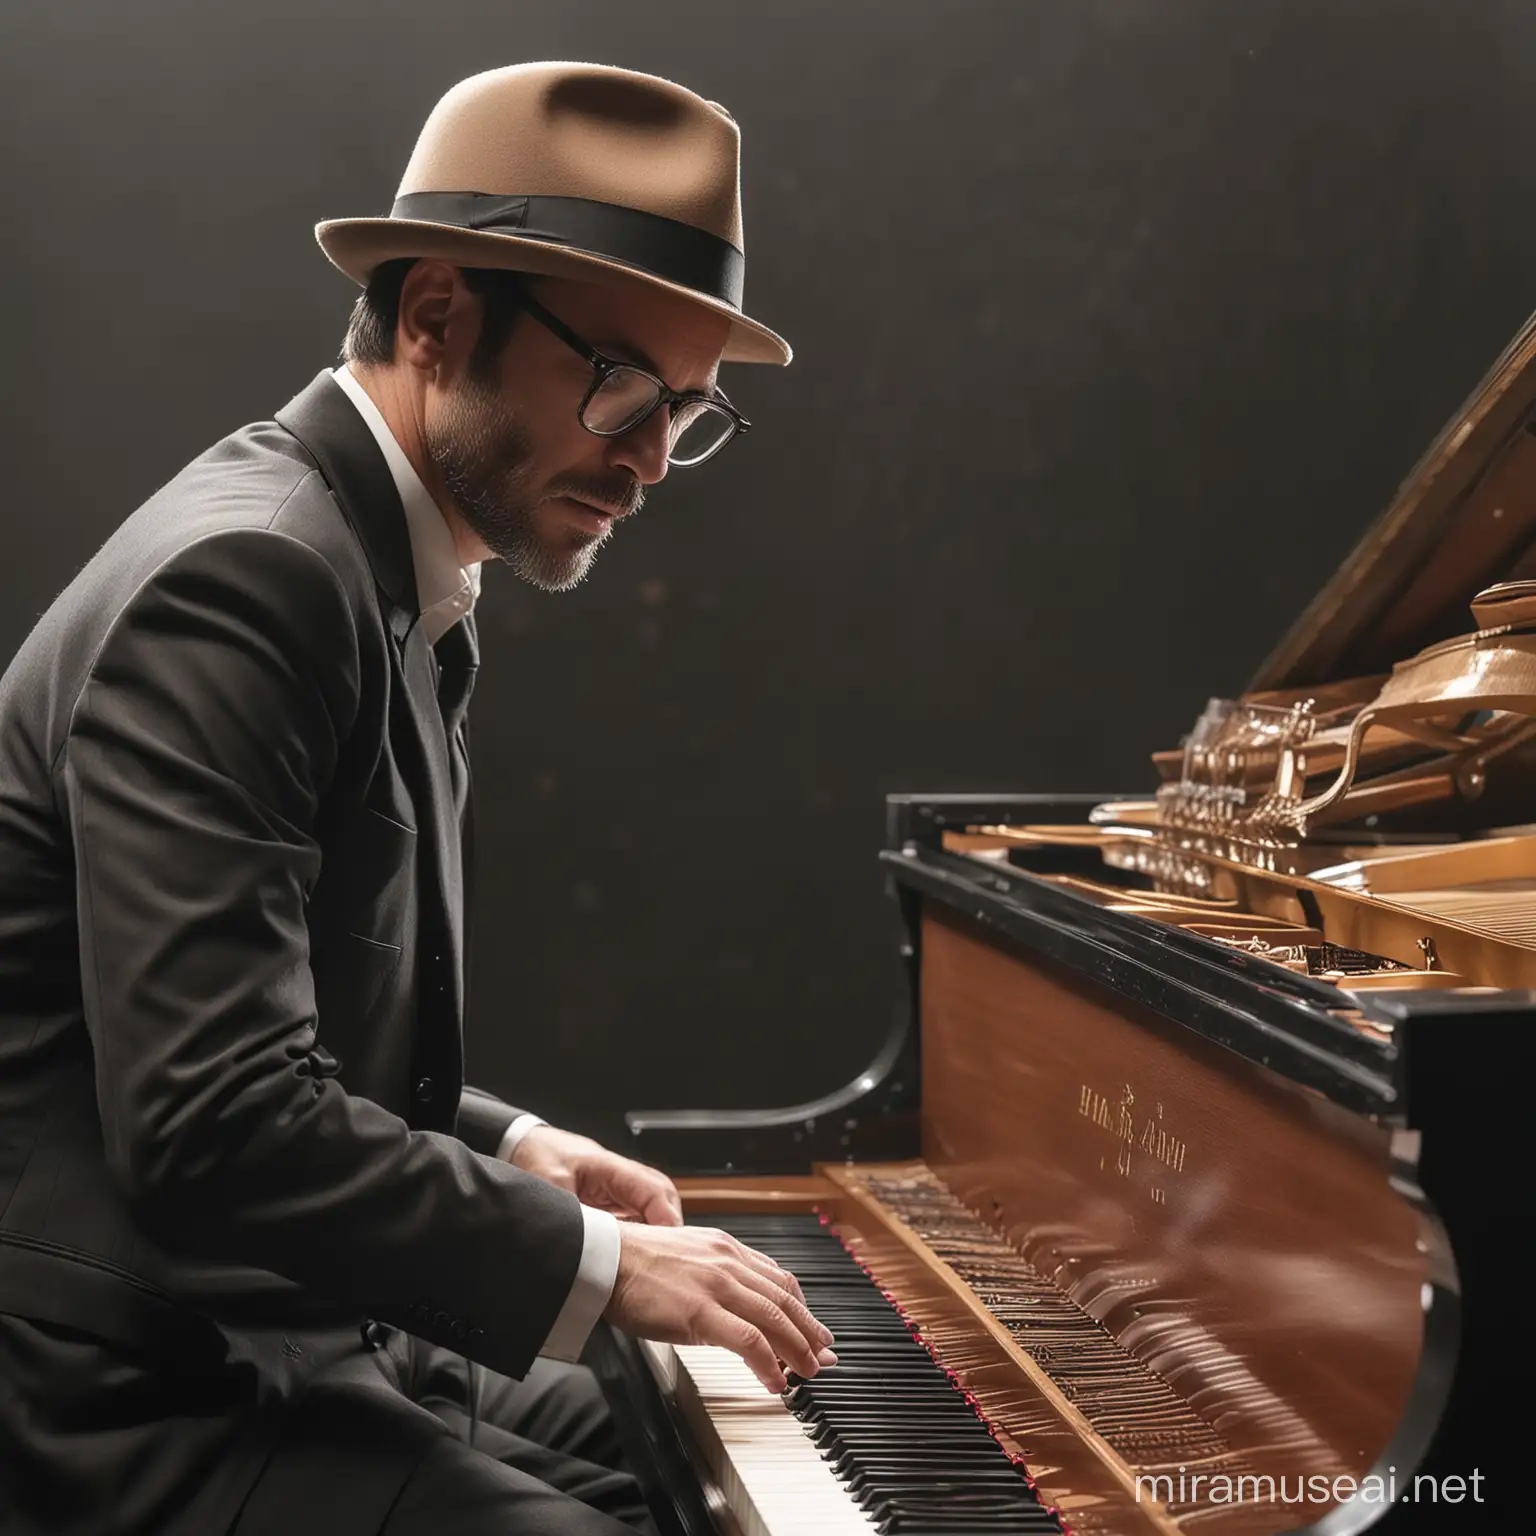 Close up Men 46 years old, handsome, wearing fedora hat, glasses, playing old grand piano on stage, facing the front of the audience , full body, detiles.